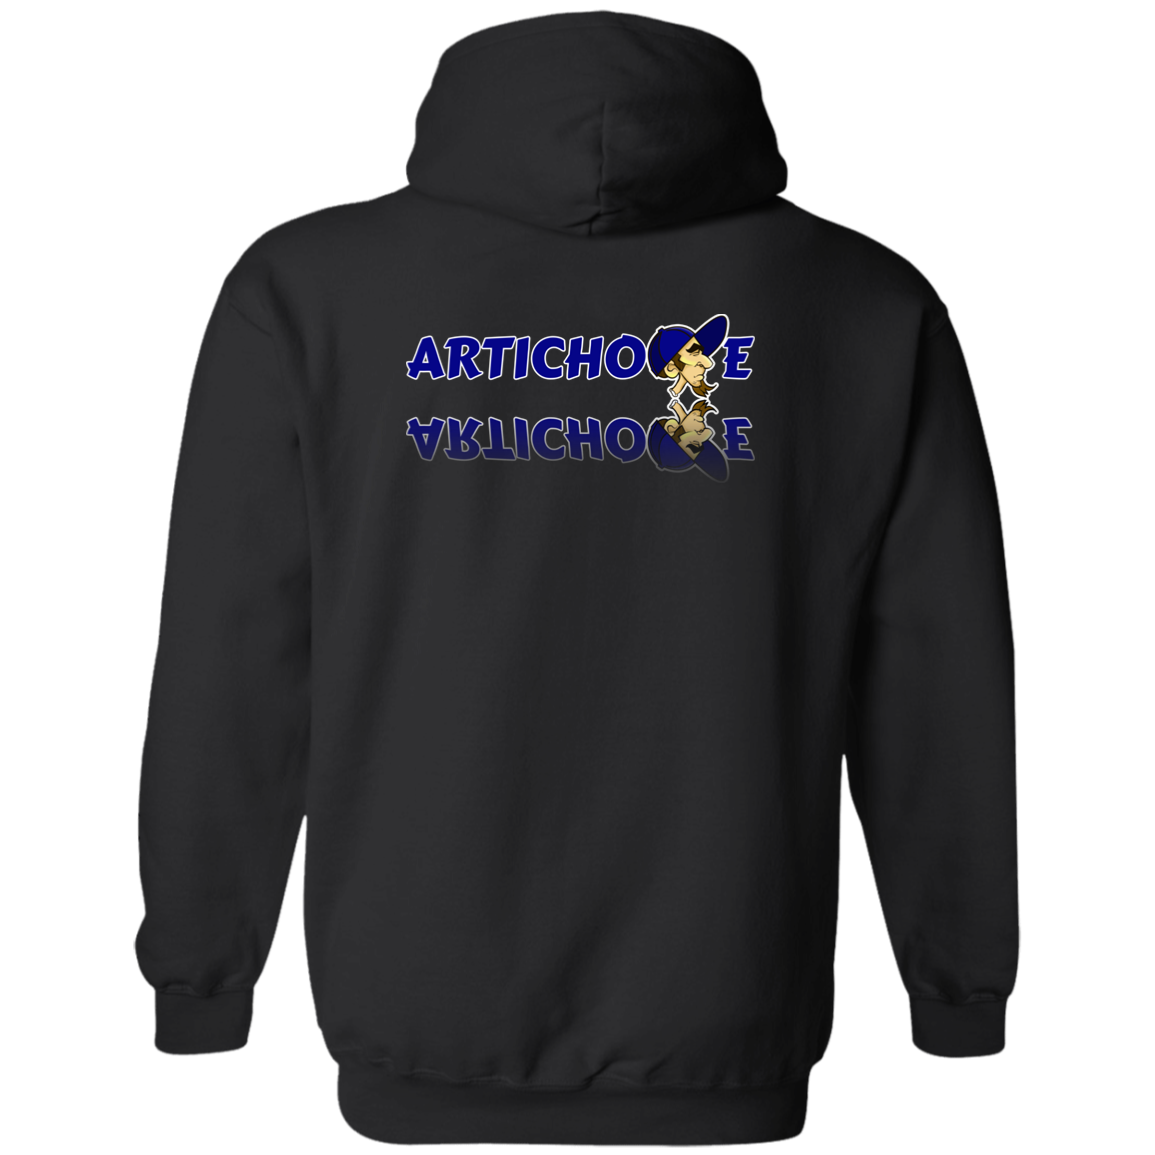 ZZ#20 ArtichokeUSA Characters and Fonts. "Clem" Let’s Create Your Own Design Today. Zip Up Hooded Sweatshirt